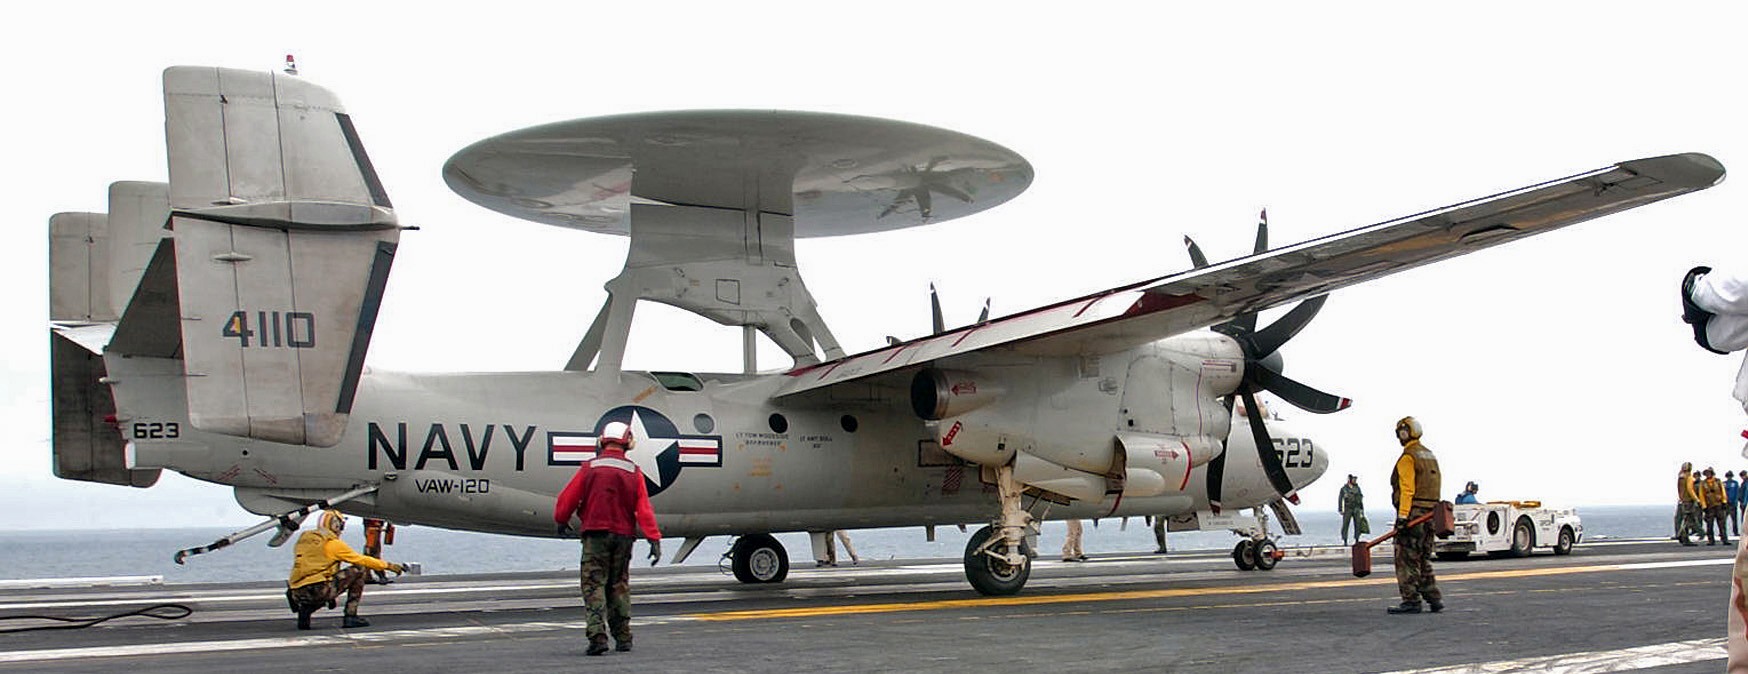 vaw-120 greyhawks carrier airborne early warning squadron e-2c hawkeye replacement uss theodore roosevelt cvn-71 109